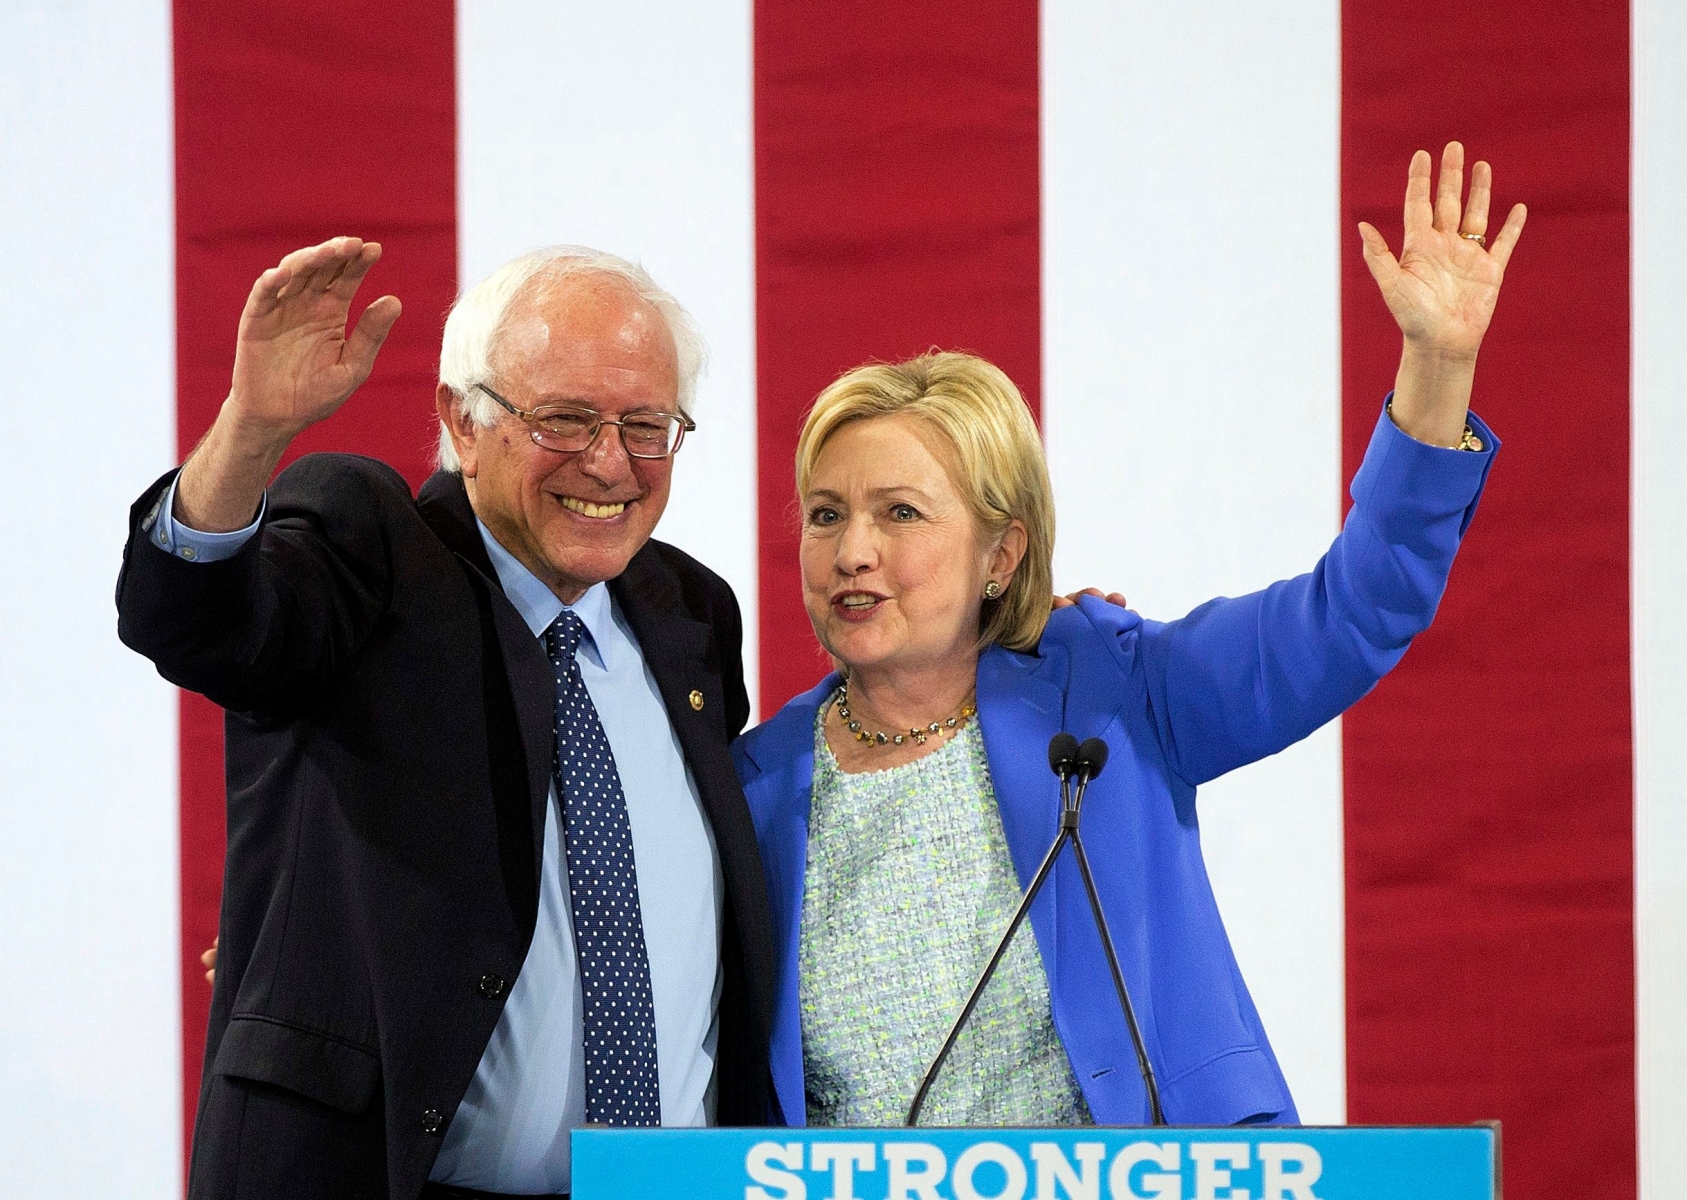 Democratic presidential candidate Hillary Clinton waves to supporters with Sen. Bernie Sanders, I-Vt., during a rally in Portsmouth, N.H., Tuesday, July 12, 2016, where Sanders endorsed her for president. (AP Photo/Jim Cole) APTOPIX Campaign 2016 Clinton Sanders